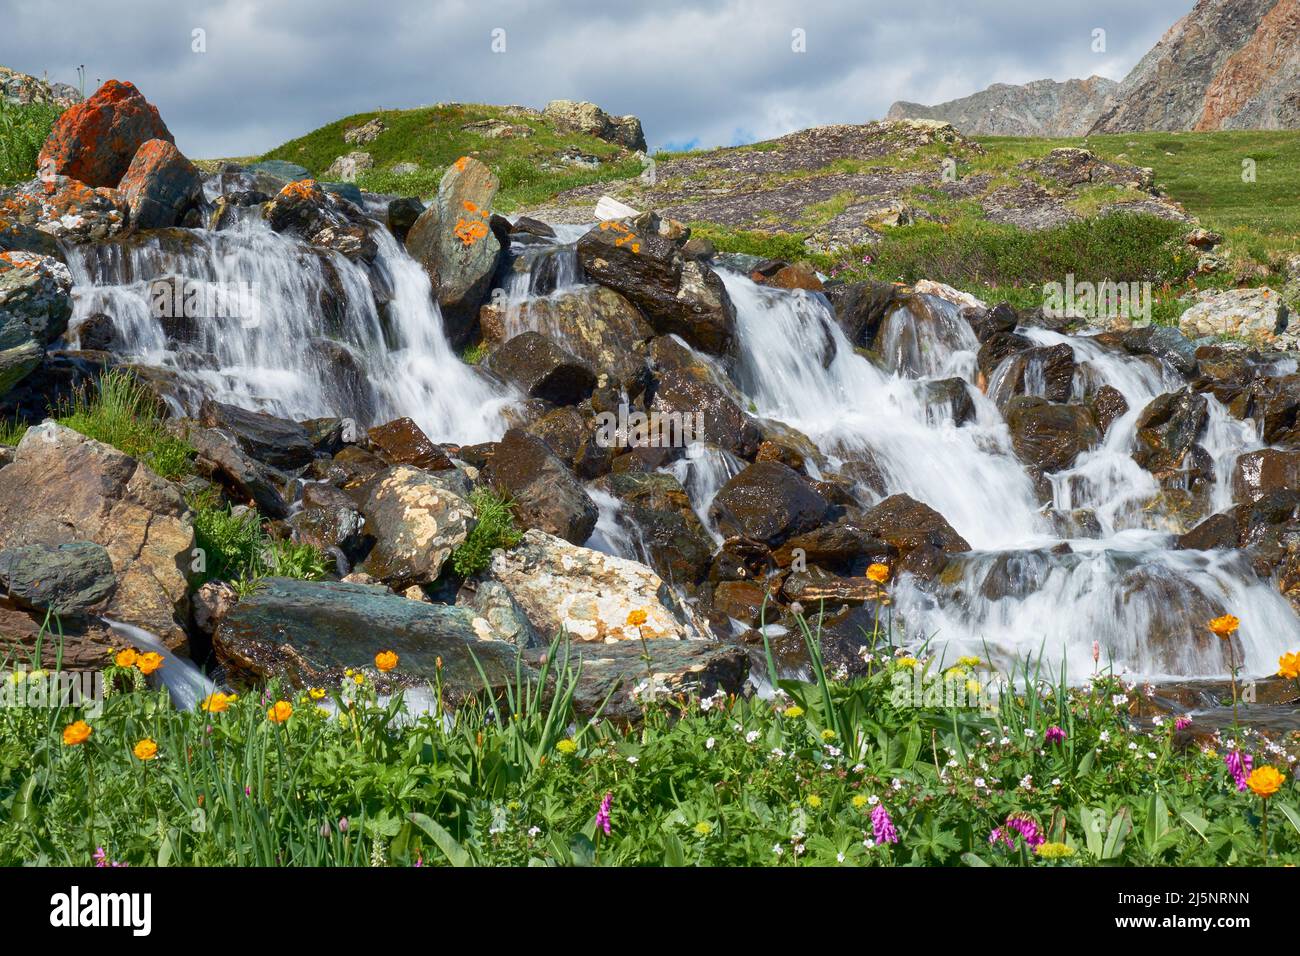 Waterfall on Altai river Yarlyamry. The cascade on the stream is surrounded by alpine forb meadows. Located on Kuray mountain range. Siberia, Russia. Stock Photo